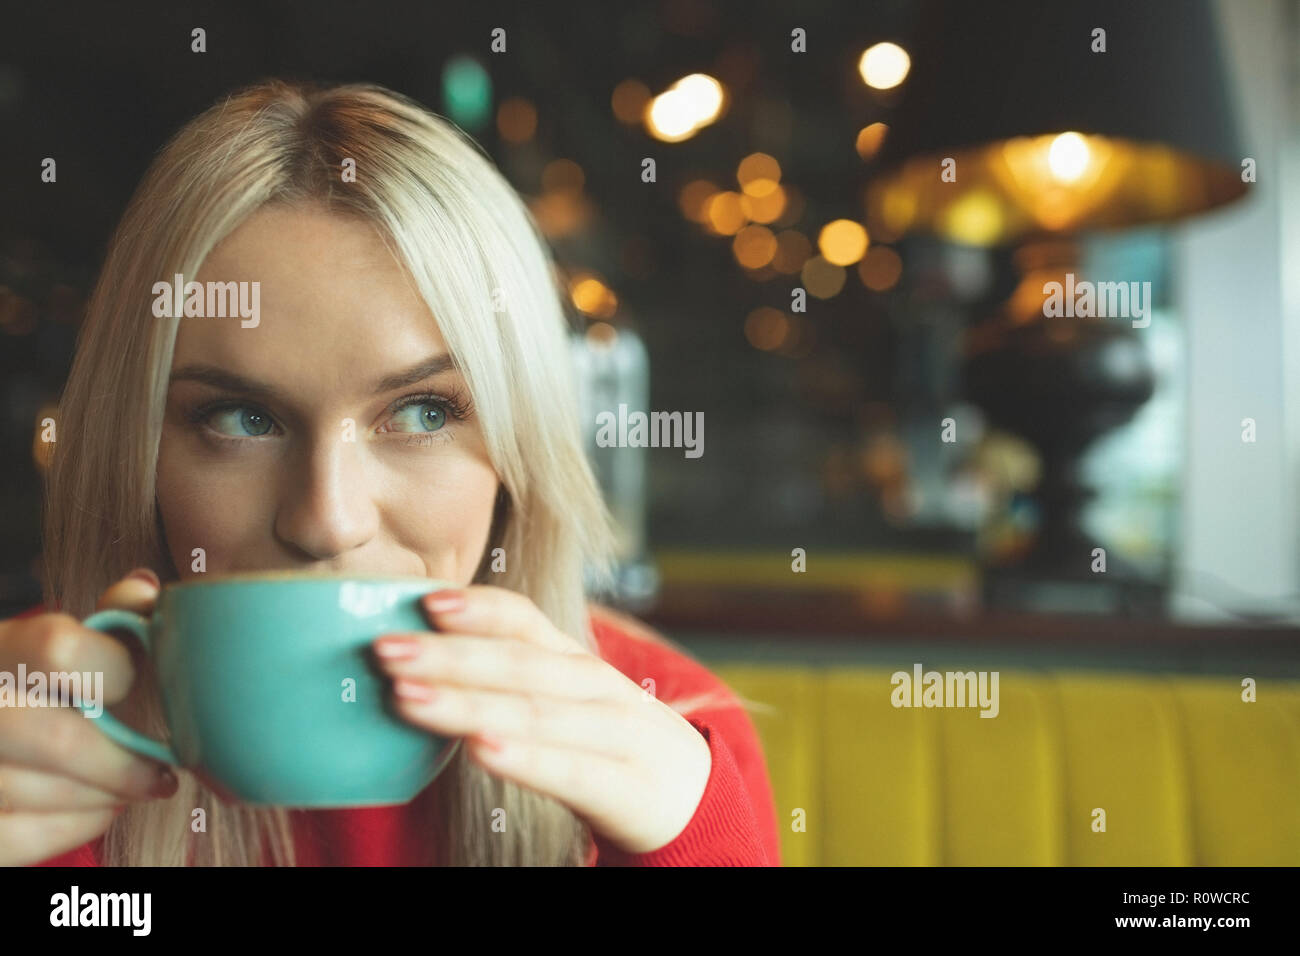 Woman sipping coffee in cafeteria Stock Photo